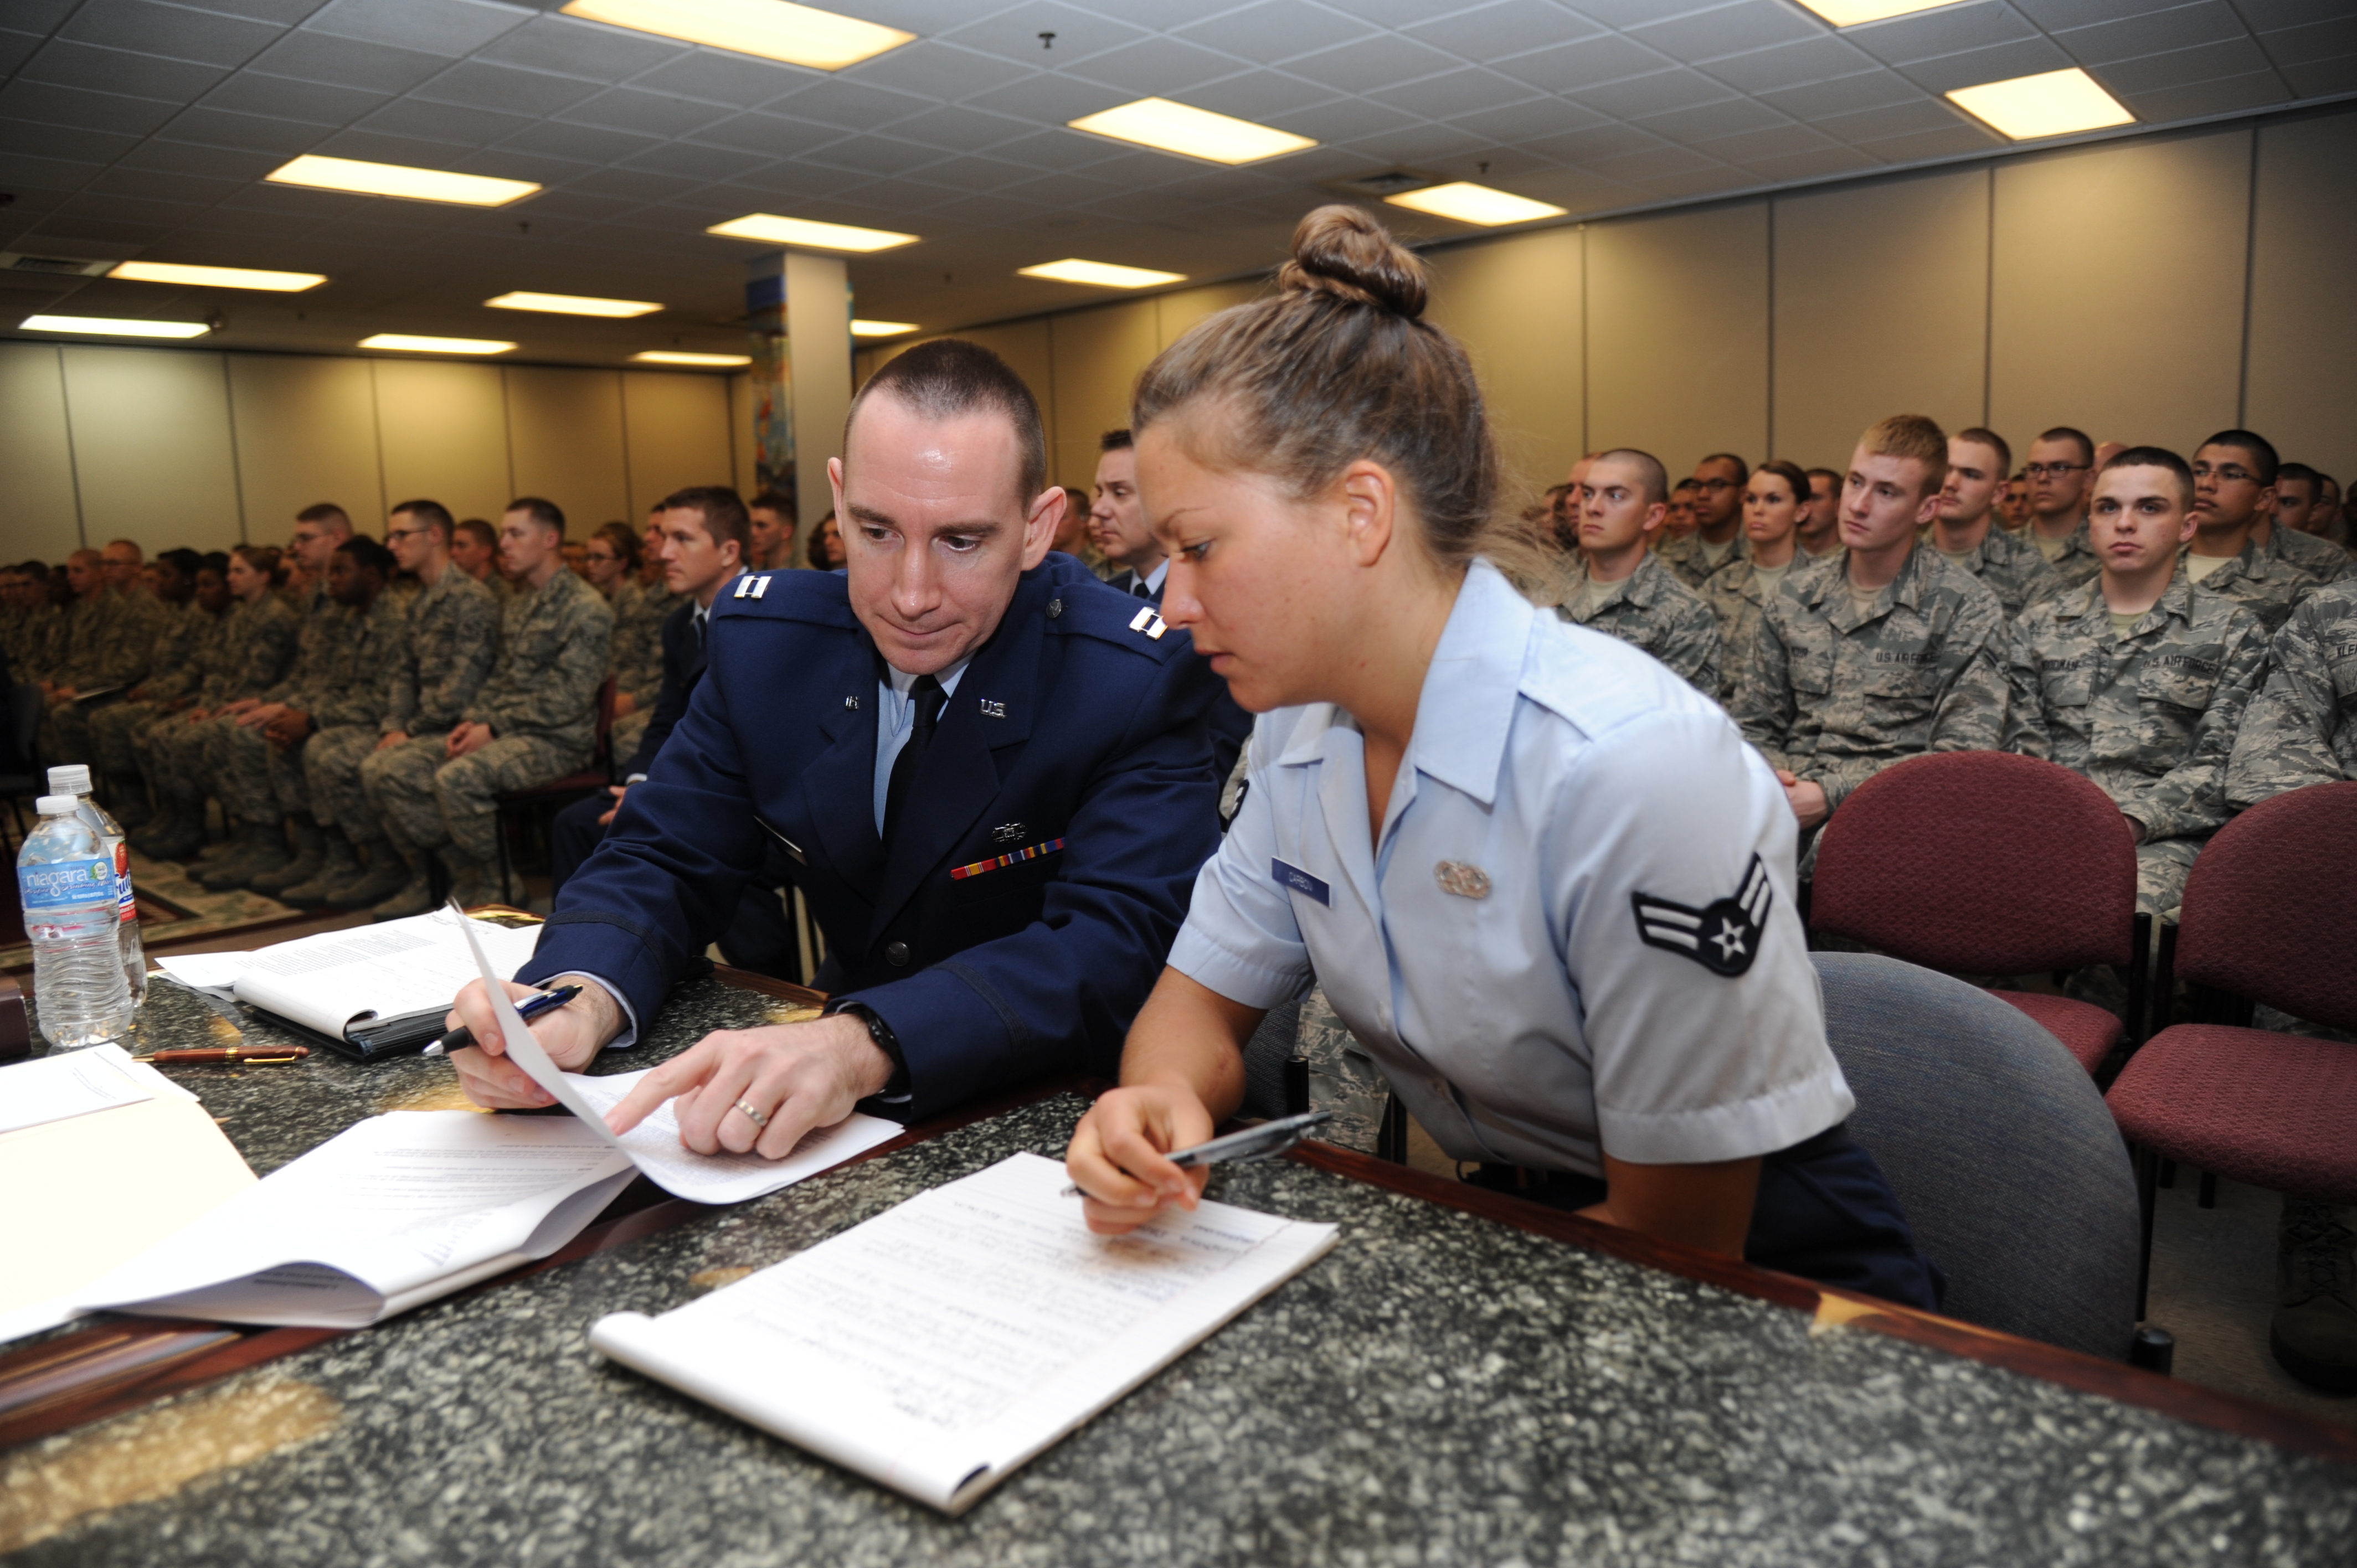 students-learn-from-mobile-courts-martial-keesler-air-force-base-article-display